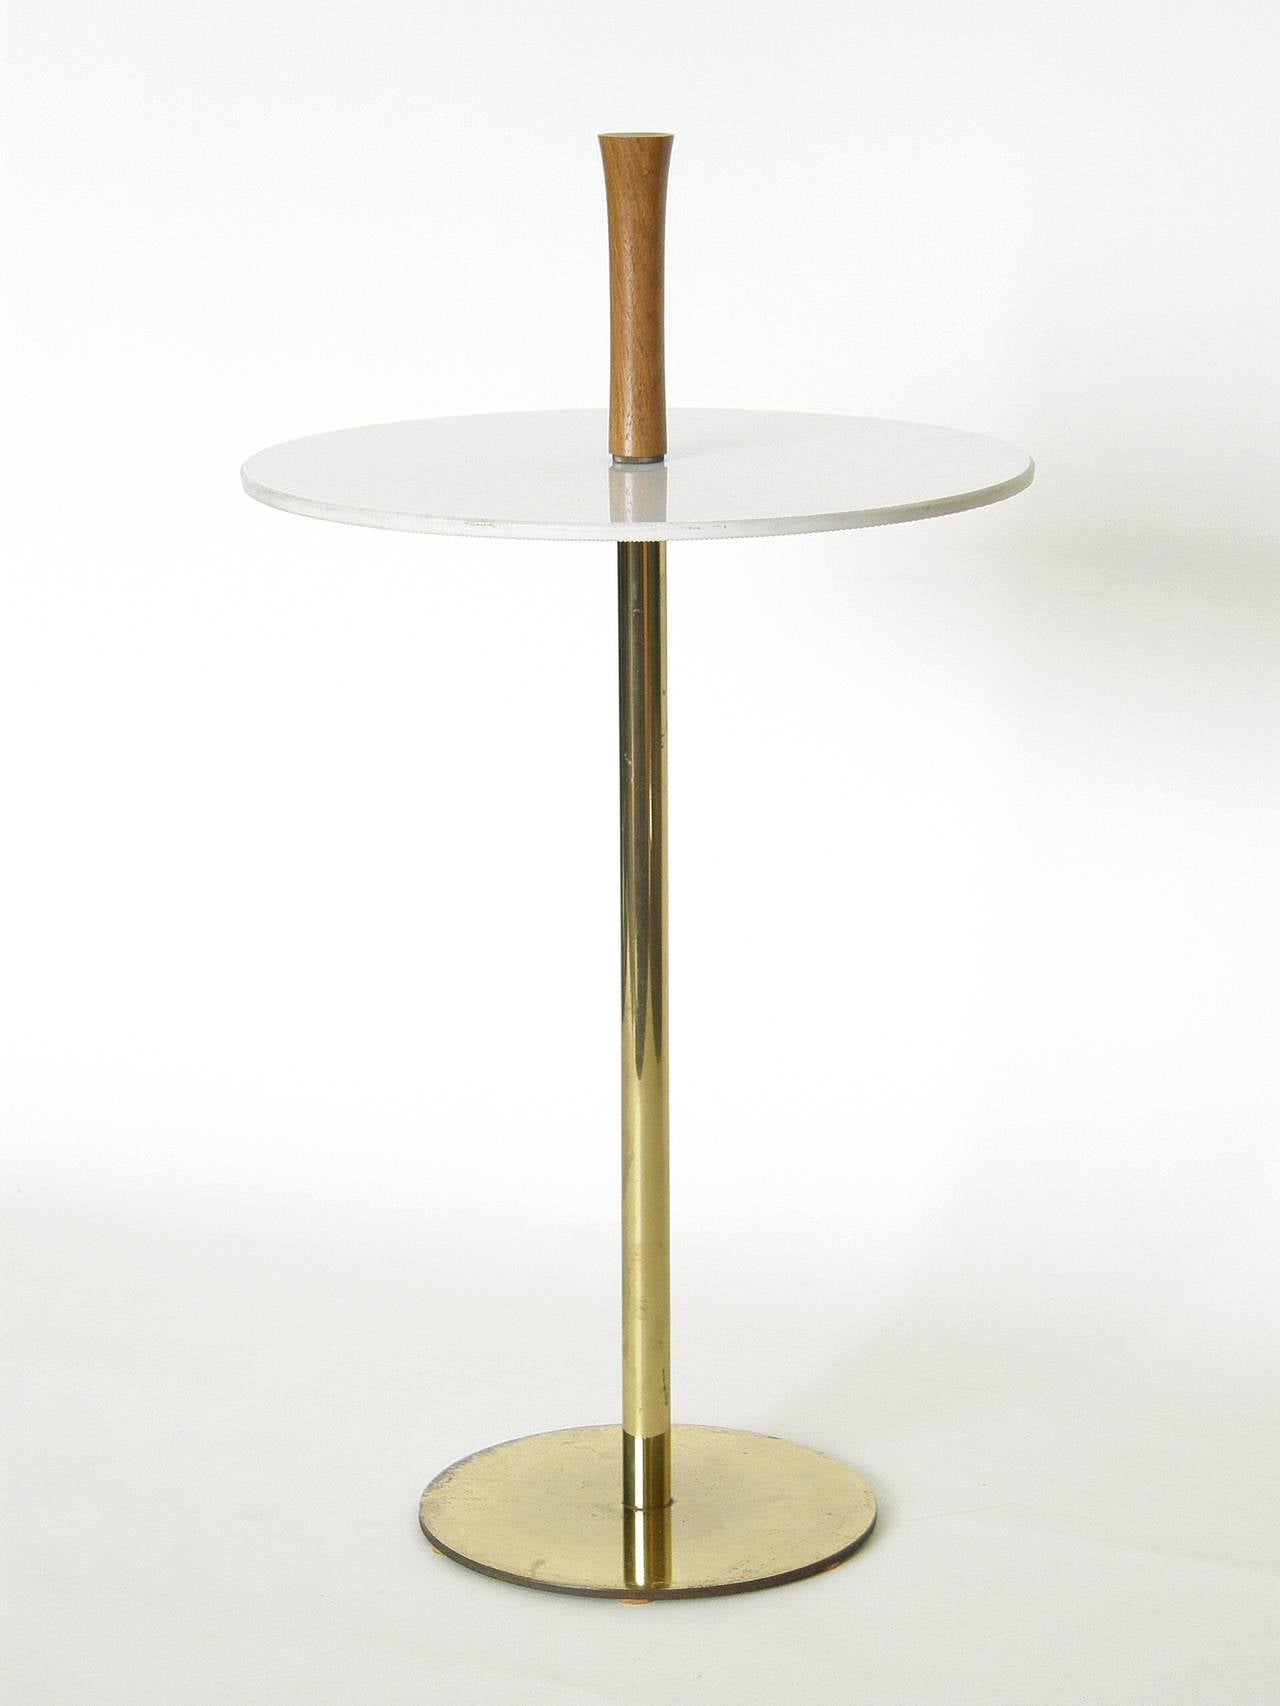 Minimalist side table or drink stand with brass base, Carrara Glass (Vitrolite) surface and wooden handle. 

The height of the glass surface is 16.25